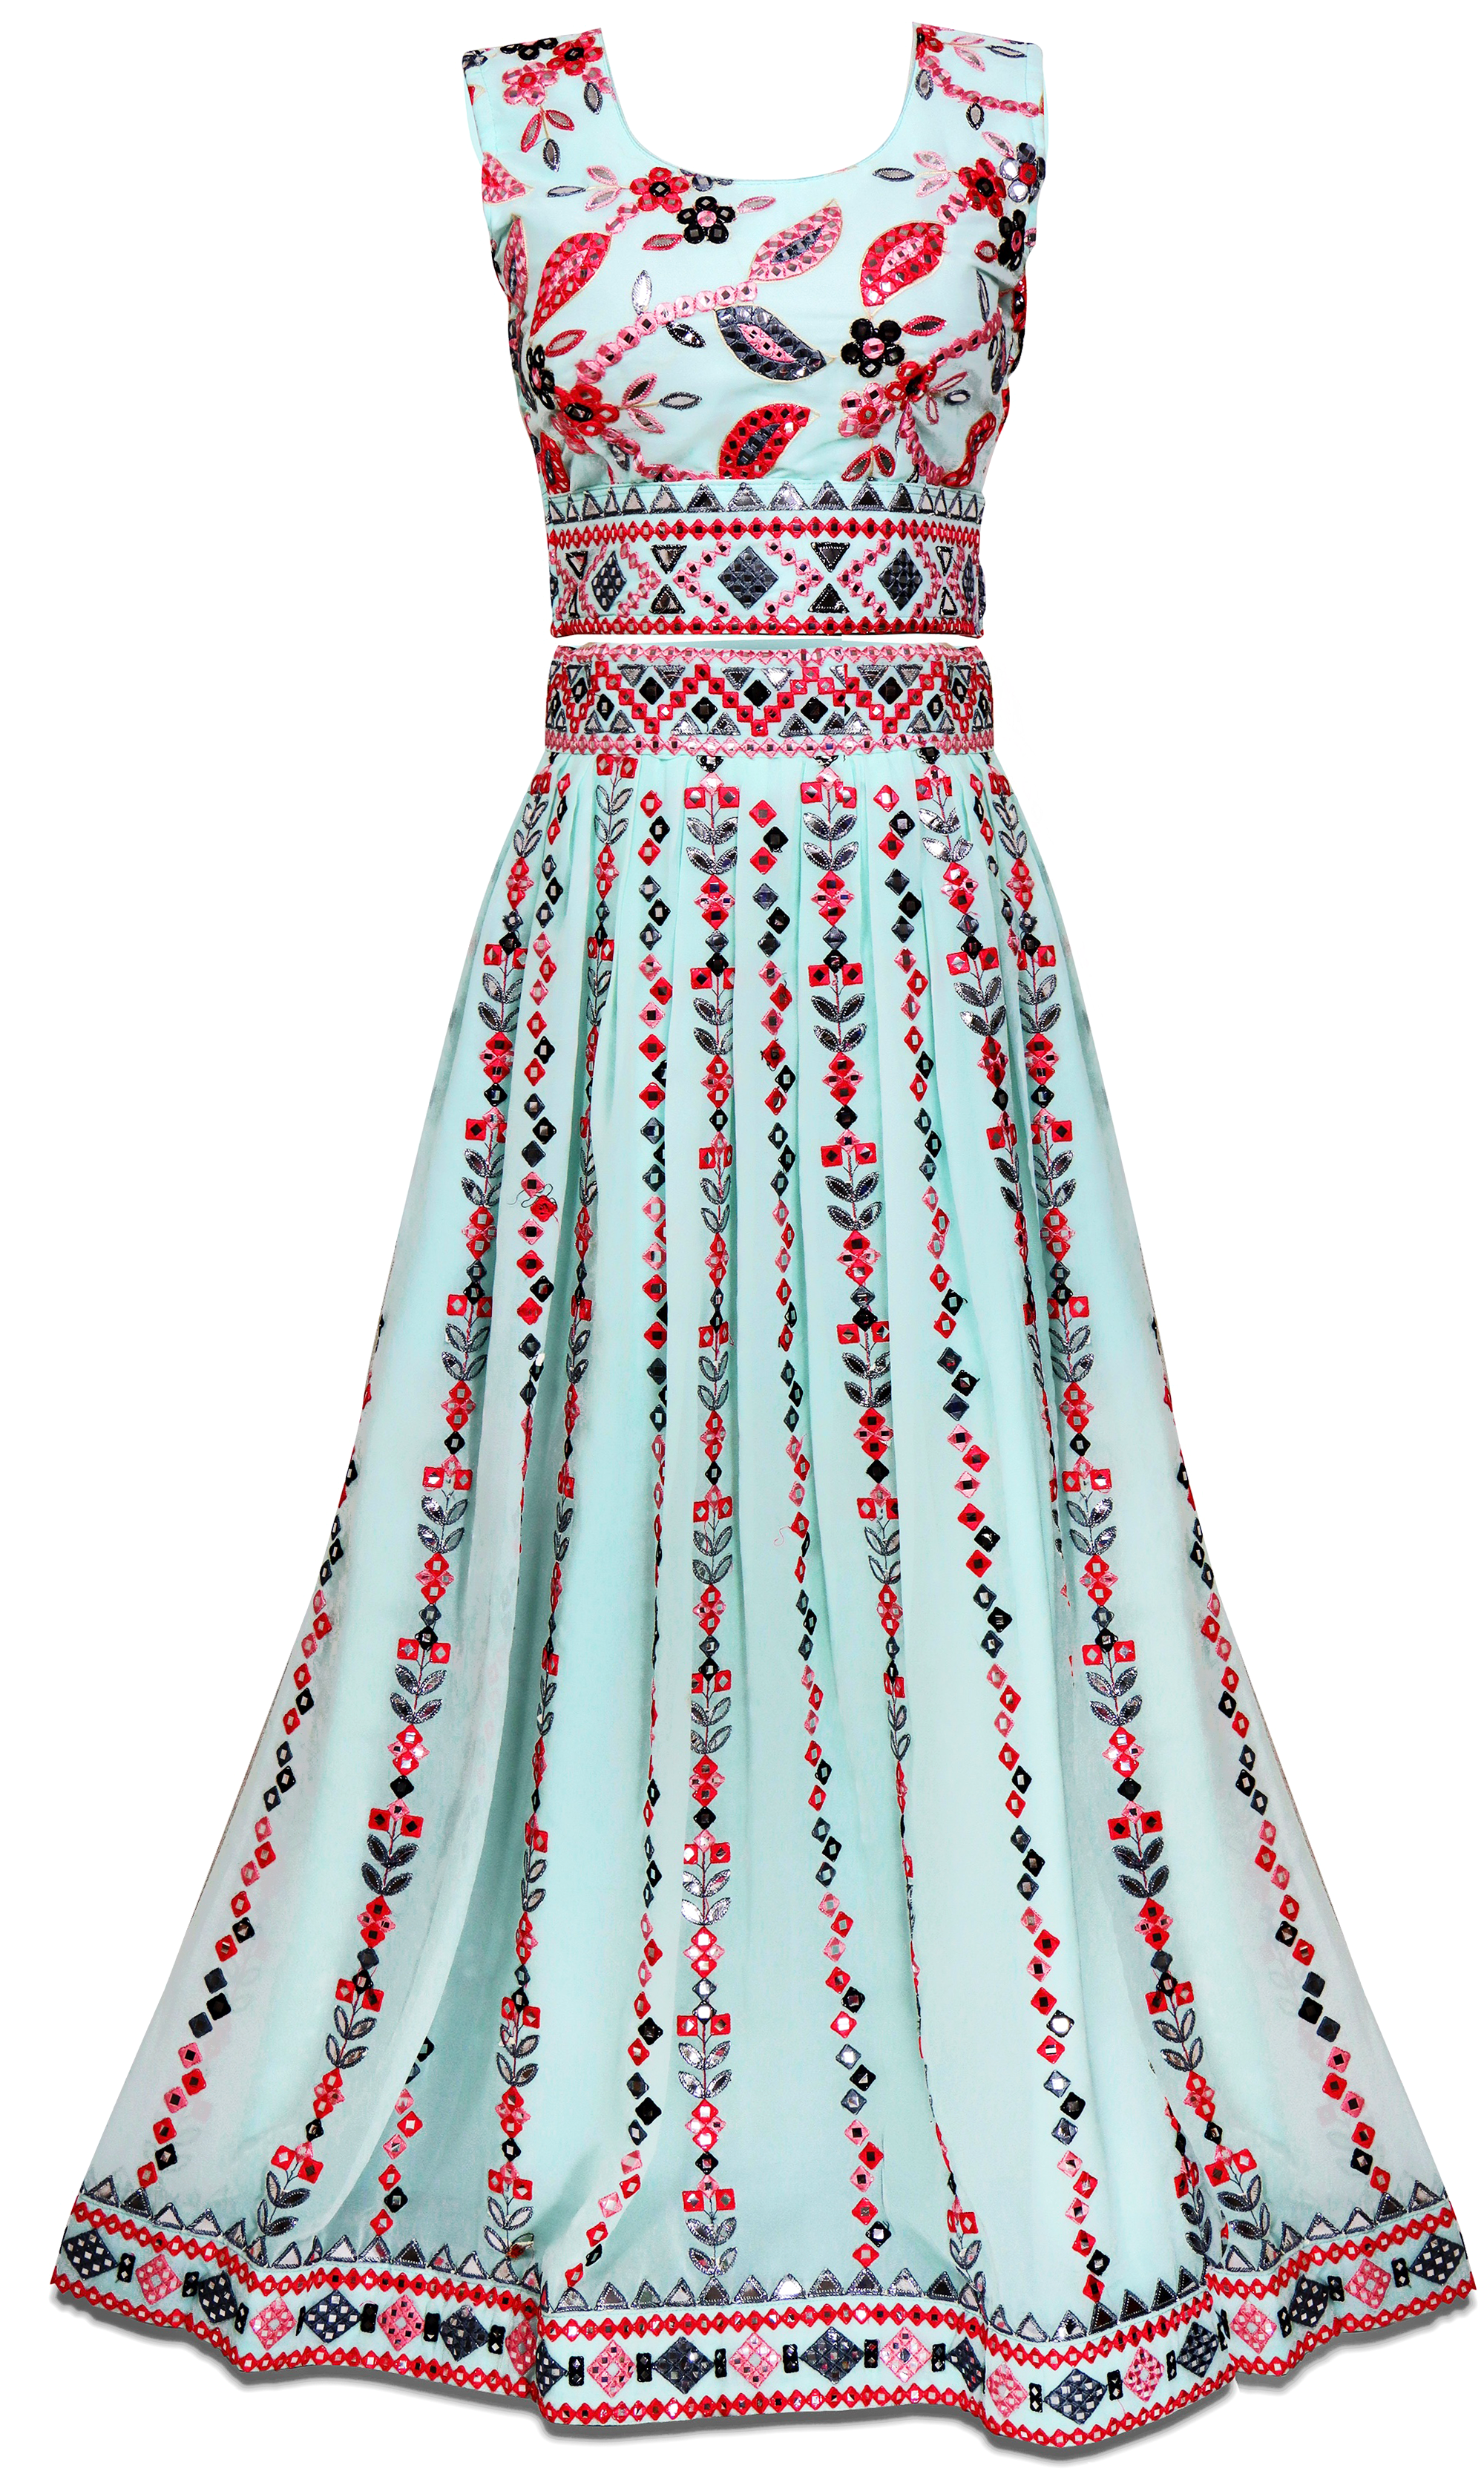 Gorgeous Pre-stitched Aquarius sky blue Lehenga with red & black threadwork all over.